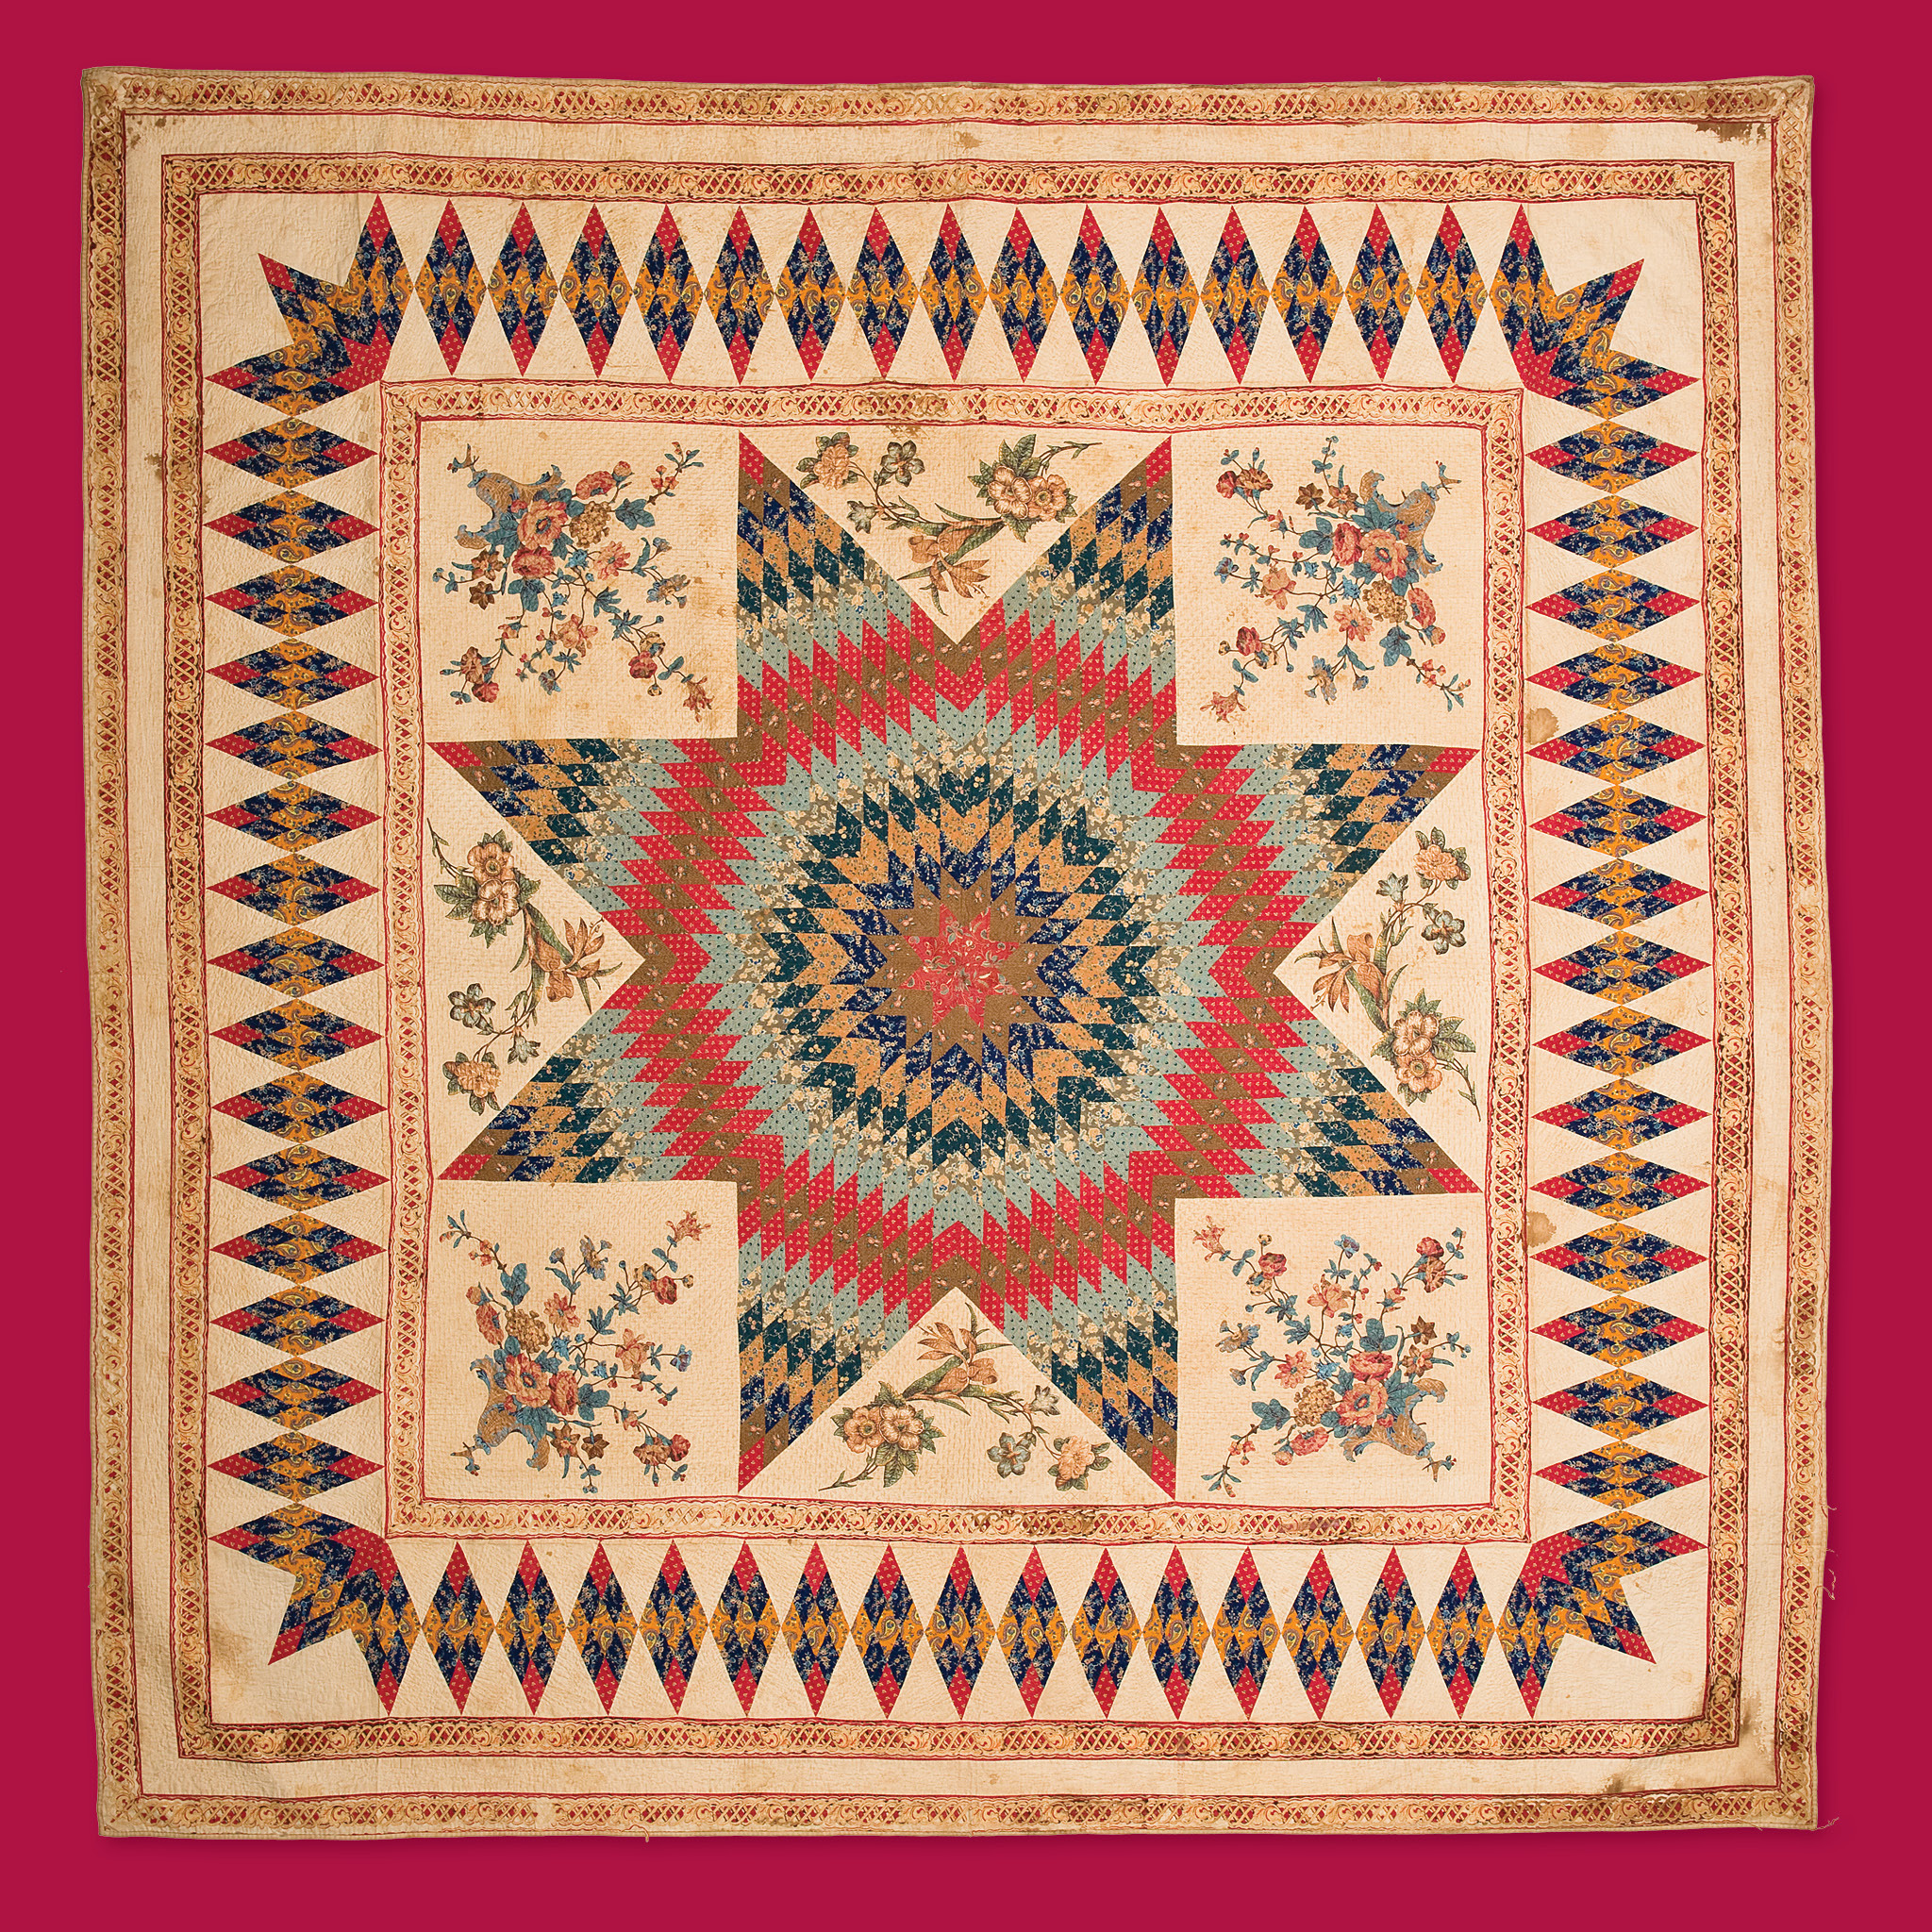 Star of Bethlehem Pieced Quilt, mid-19th century<br> Maker Unknown, descended in Eason family<br><i>Gift of Thomas Dotterer and Ann Eason, 2005</i>